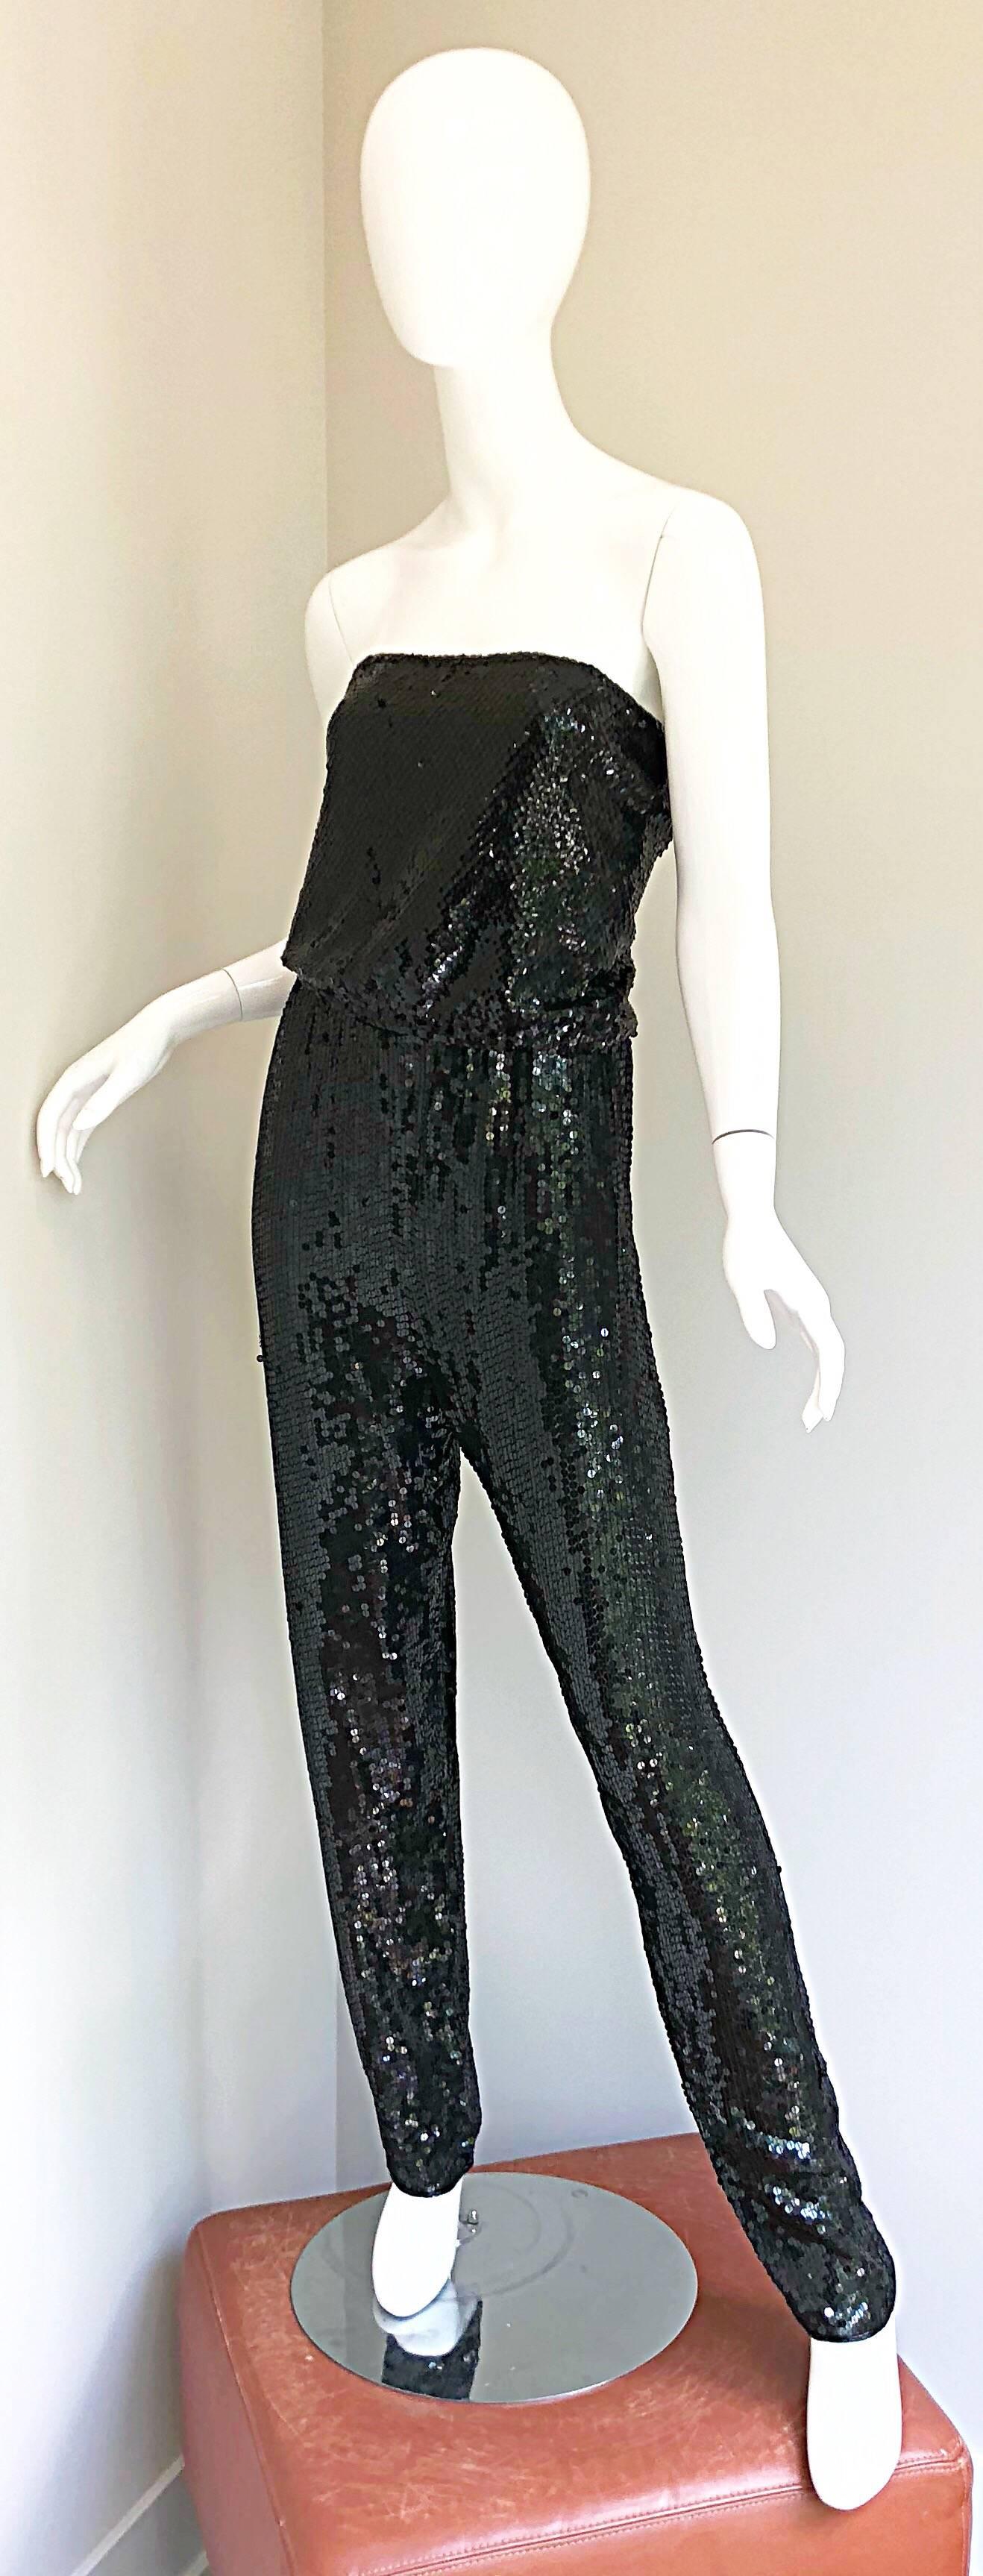 Women's 1970s Halston Black Silk Chiffon Fully Sequined 70s Strapless Tube Top + Pants For Sale